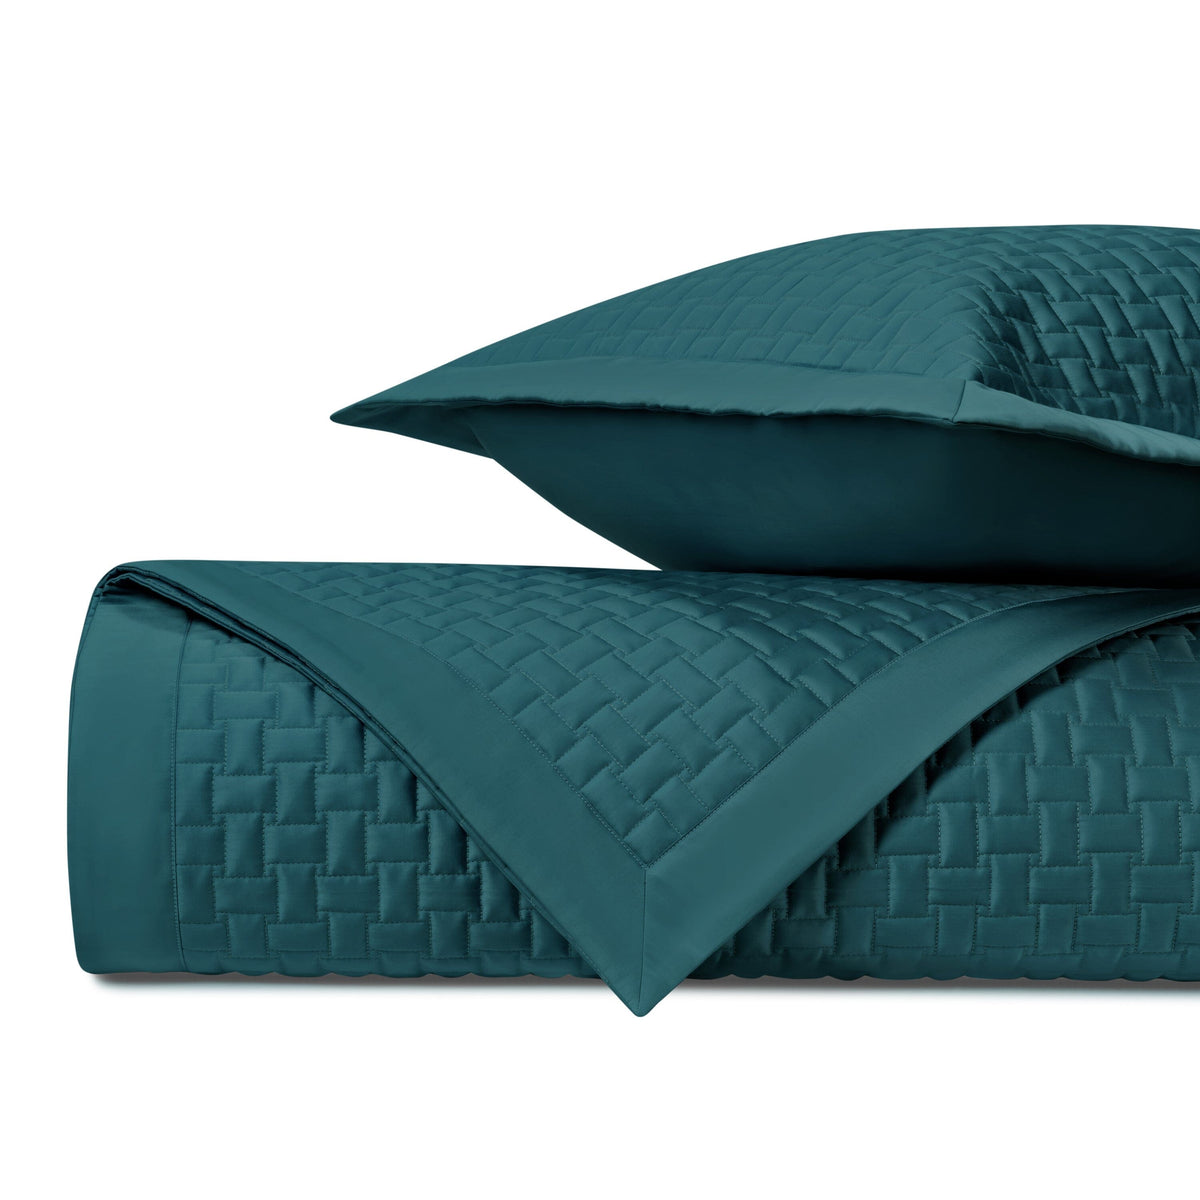 WICKER Quilted Coverlet in Teal by Home Treasures at Fig Linens and Home